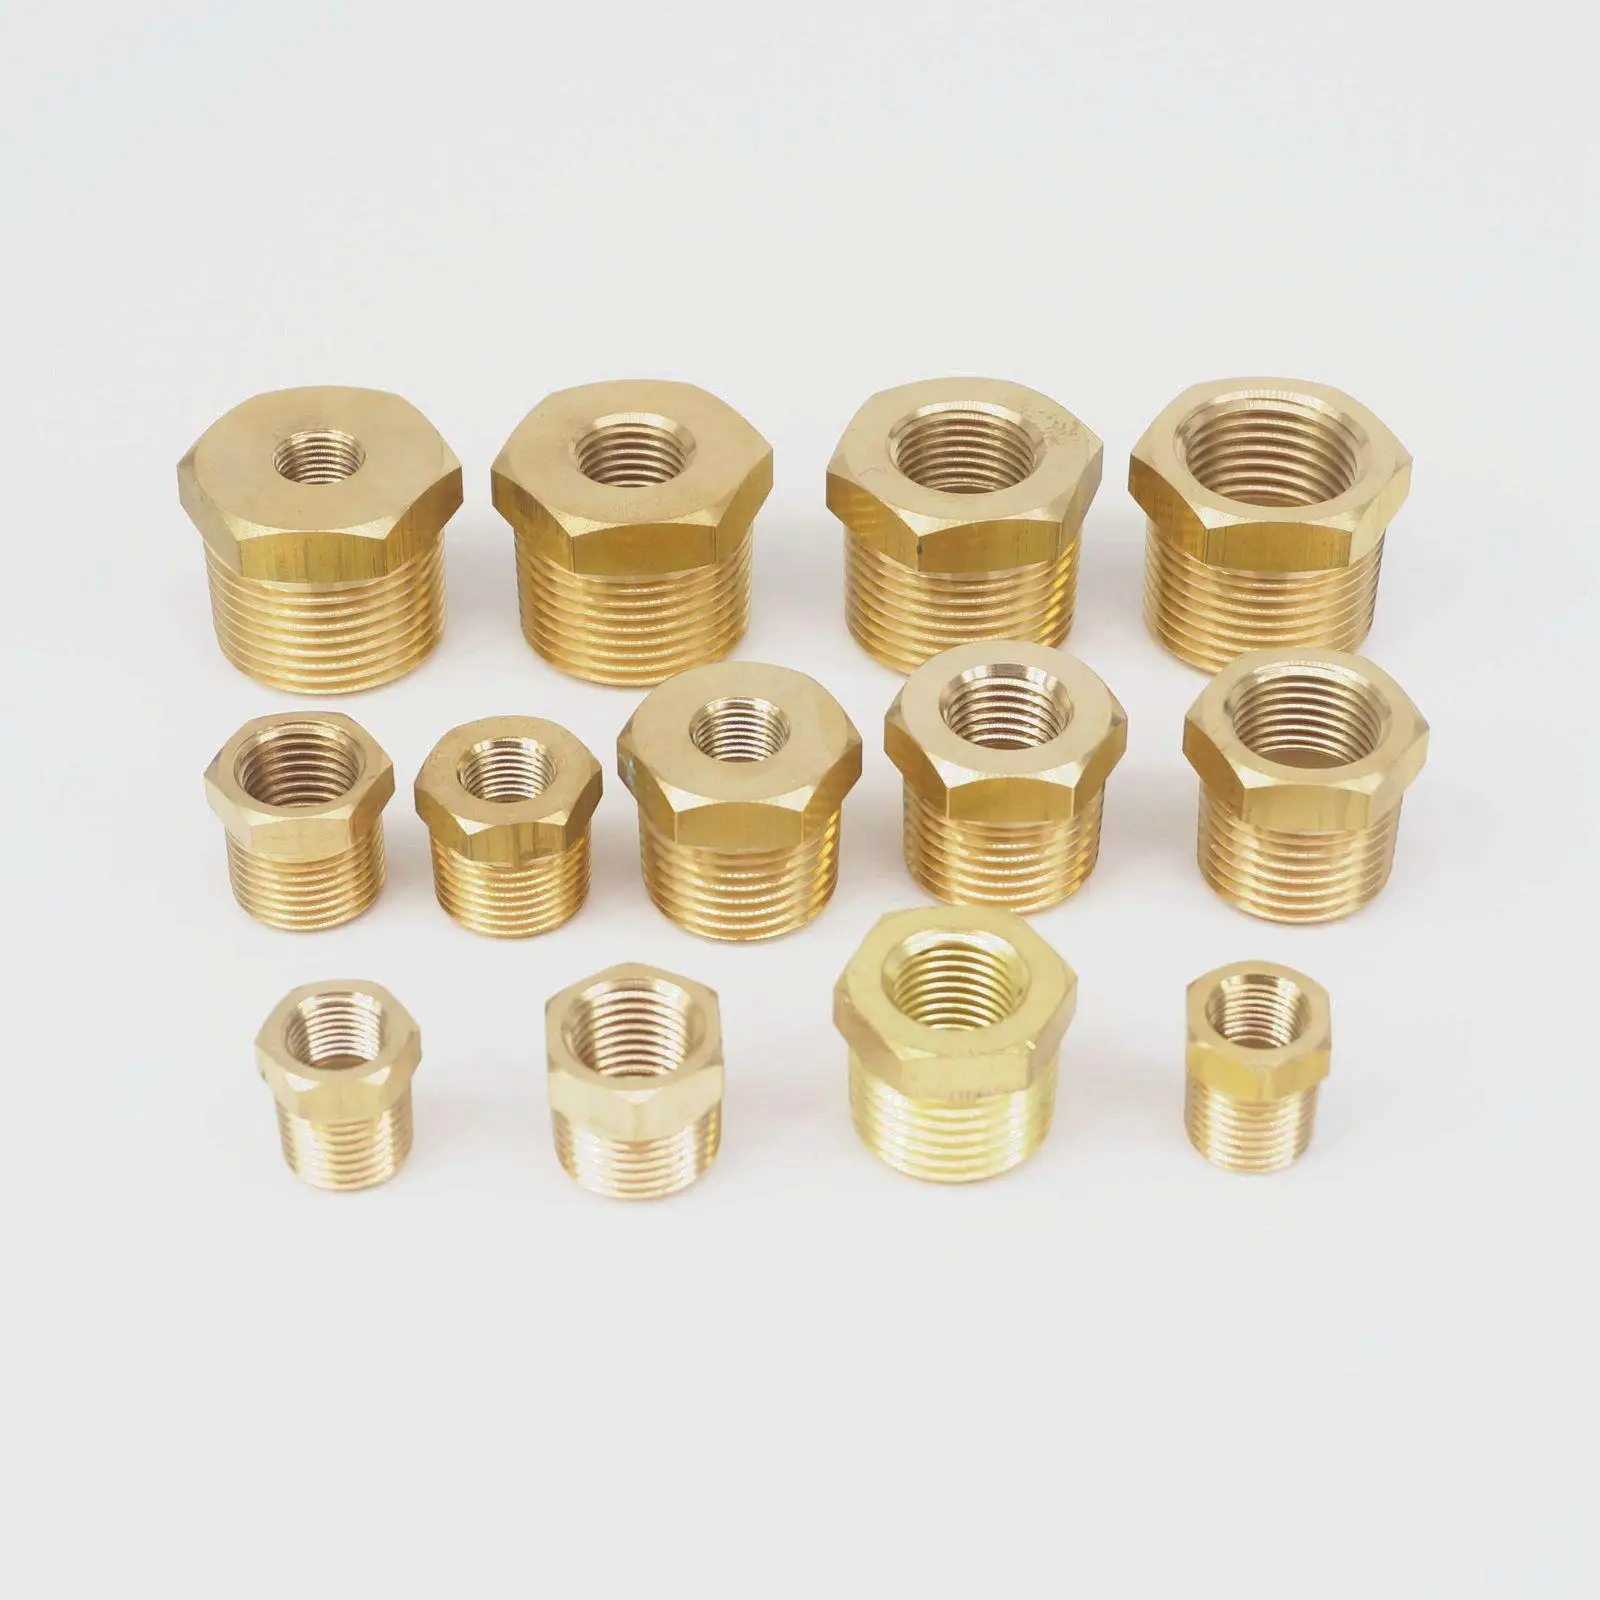 1pc 1/2" 3/4" Female x Male BSP Elbow Reducer Brass Pipe Coupler Tube Fitting 